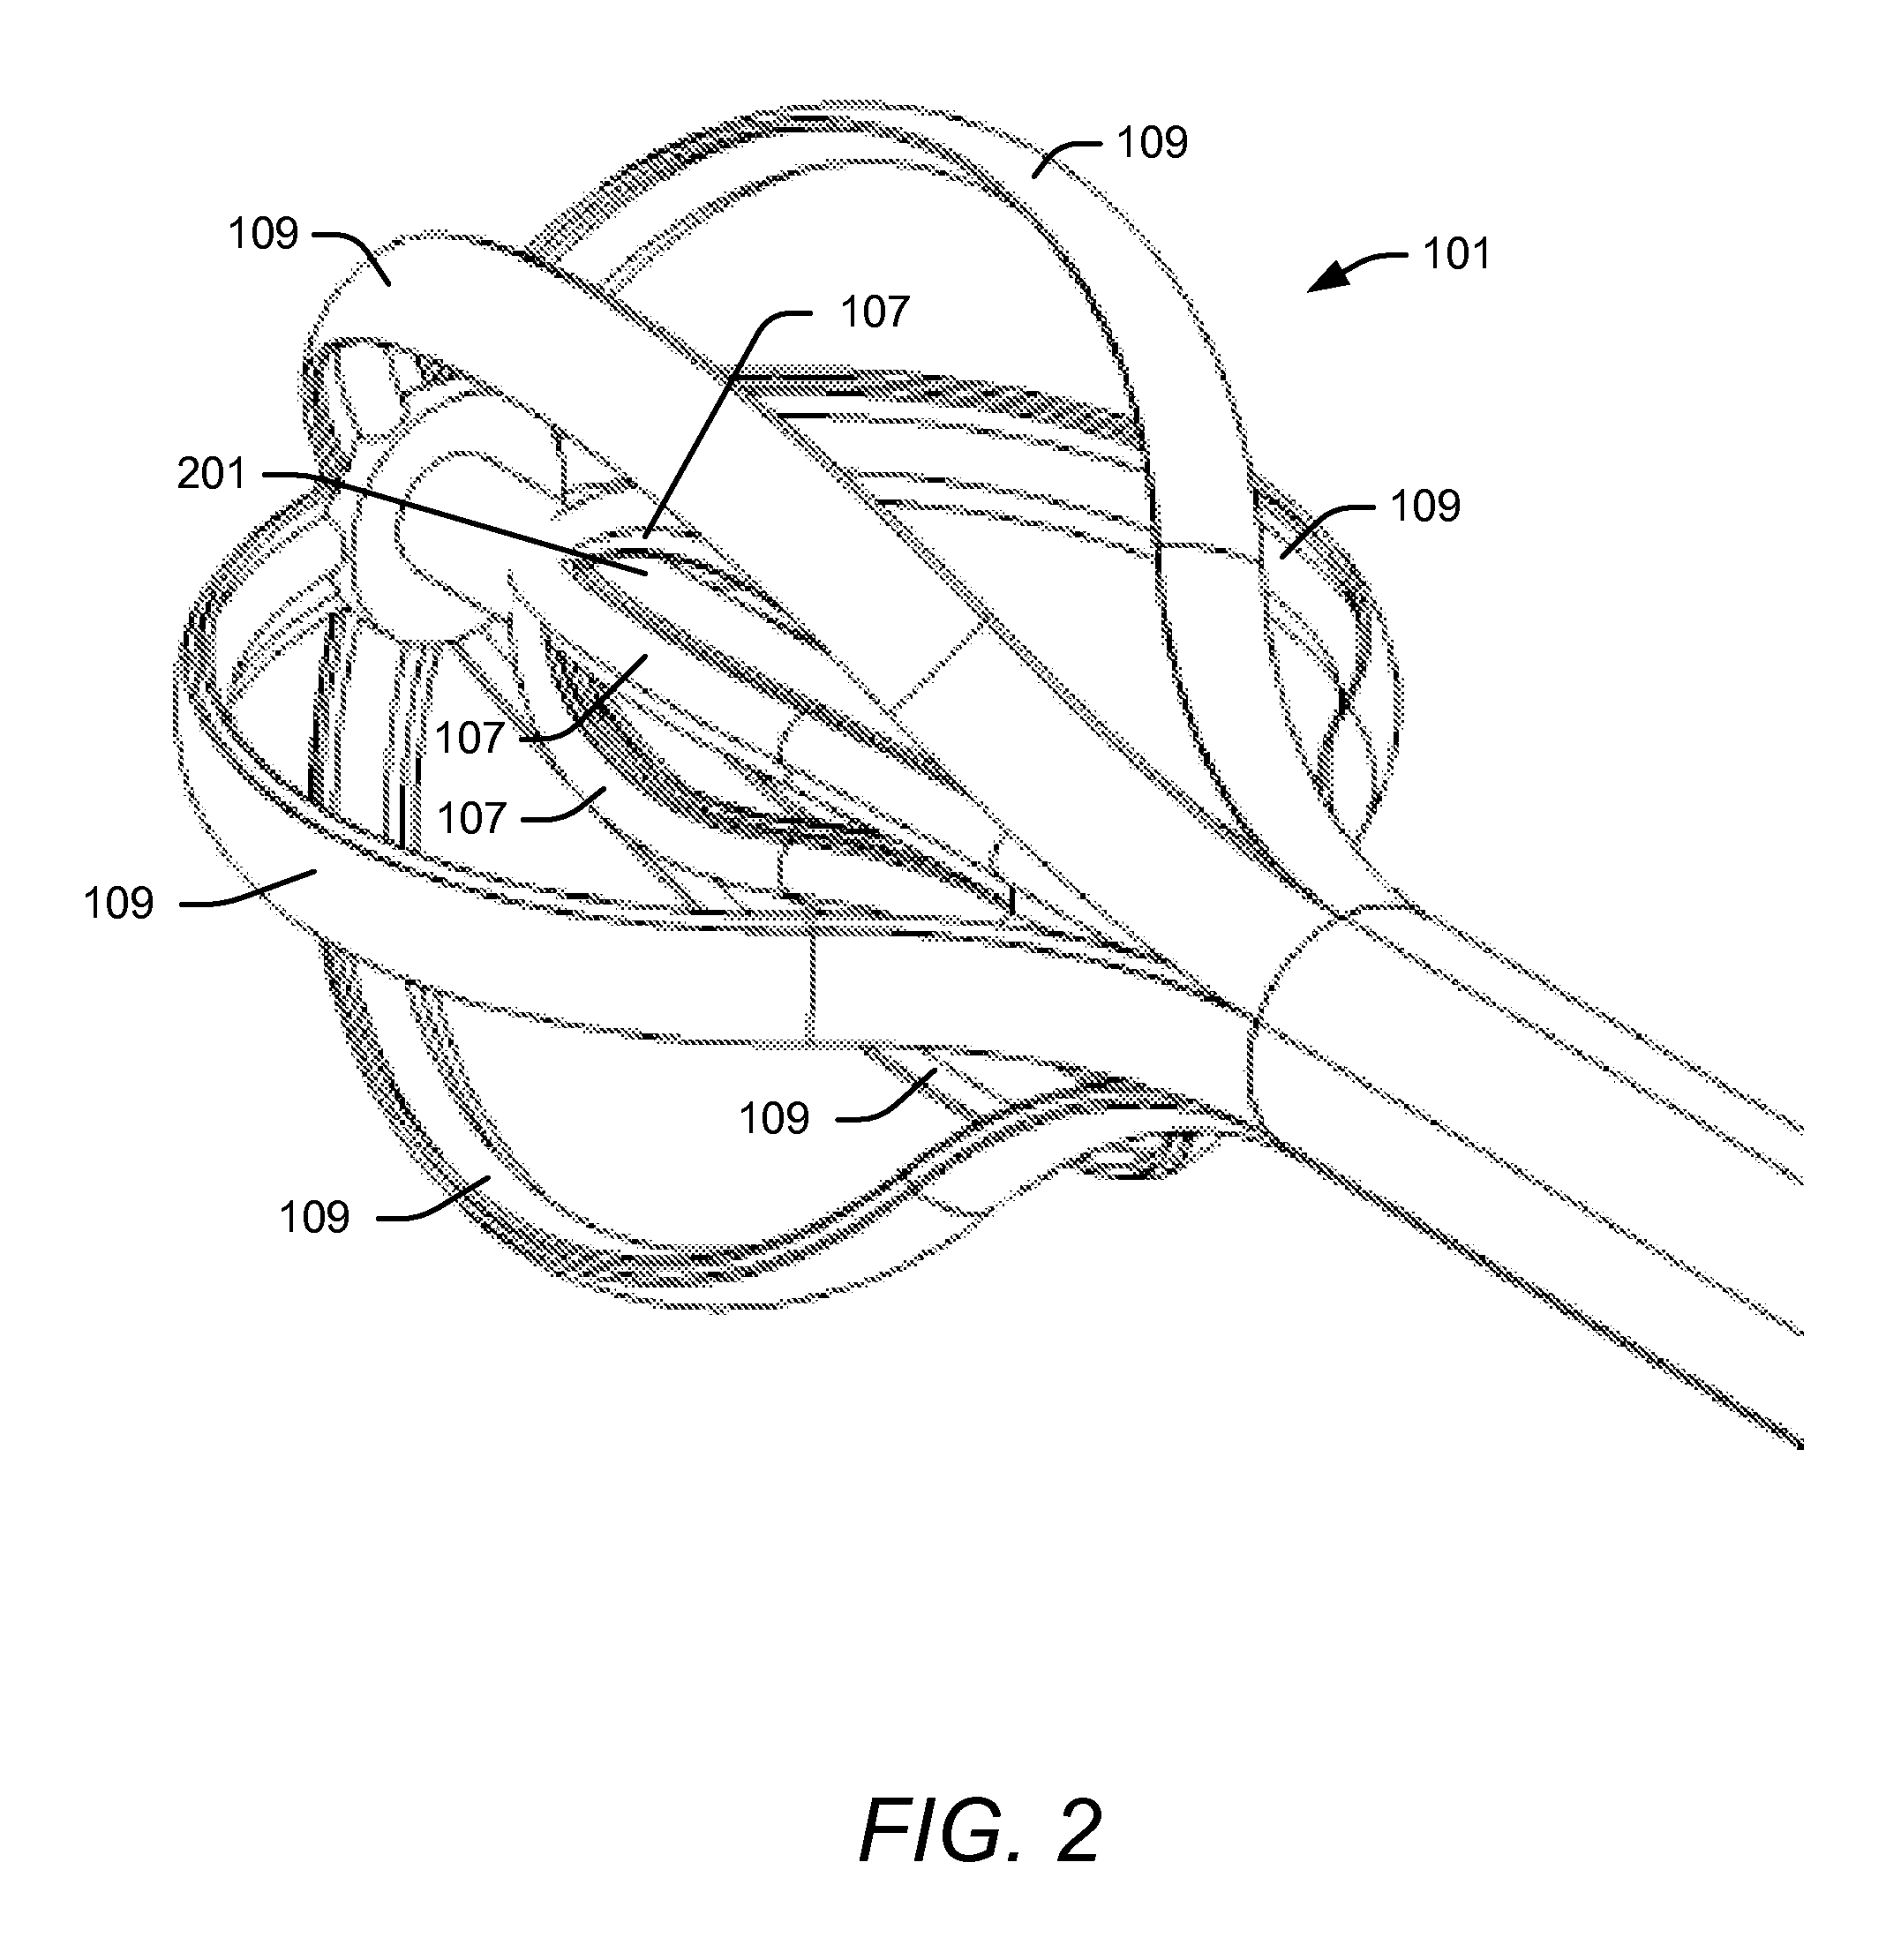 Brachytherapy Device Having an Alignment and Seal Adaptor